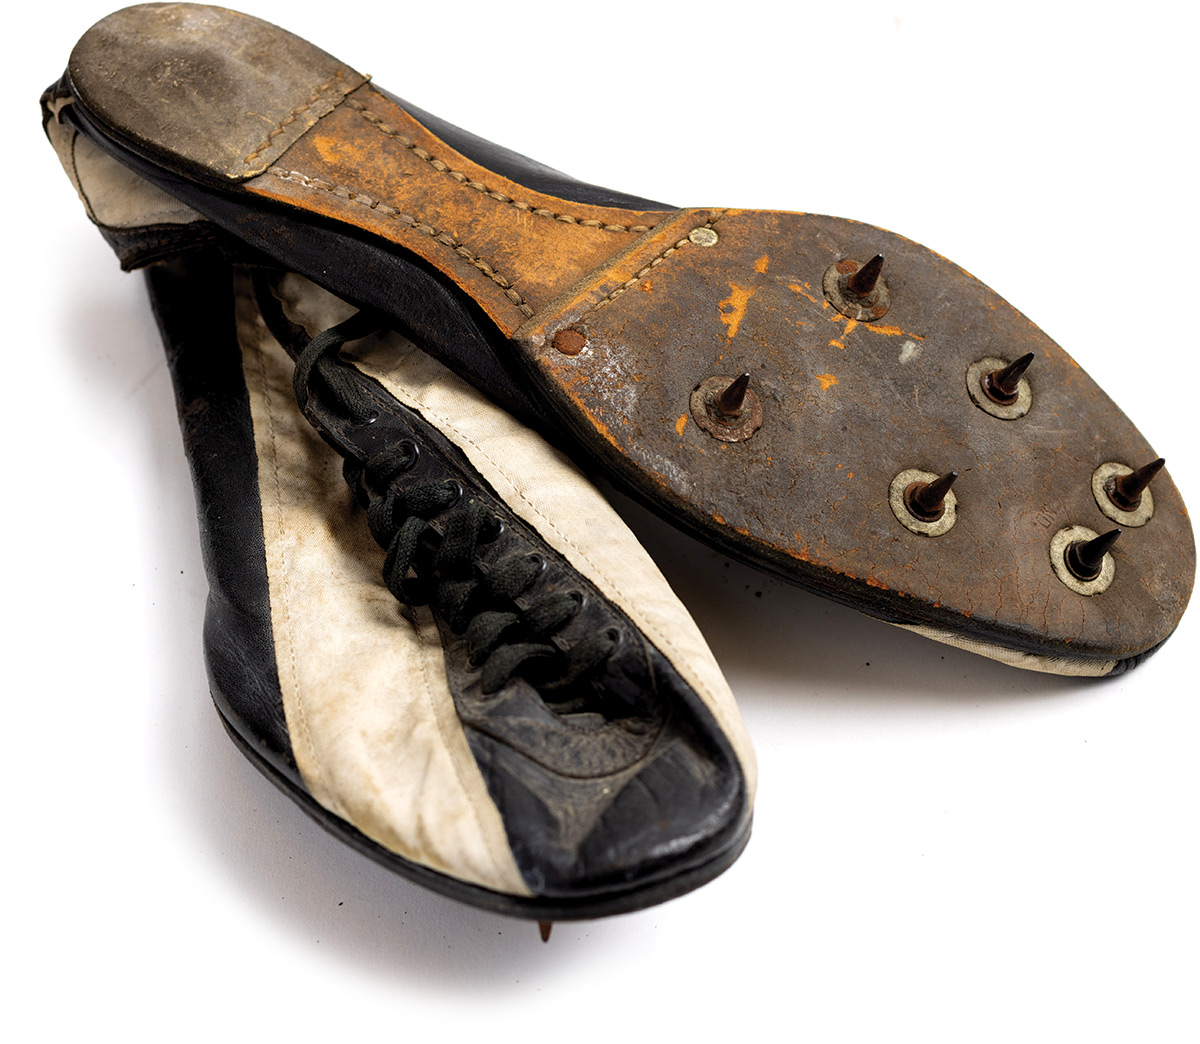 A pair of worn track shoes are black and white lace-ups. One is turned upside down to show the blackened sole and six thin, black spikes, all on the portion of the shoe that would support the toes and ball of the foot.